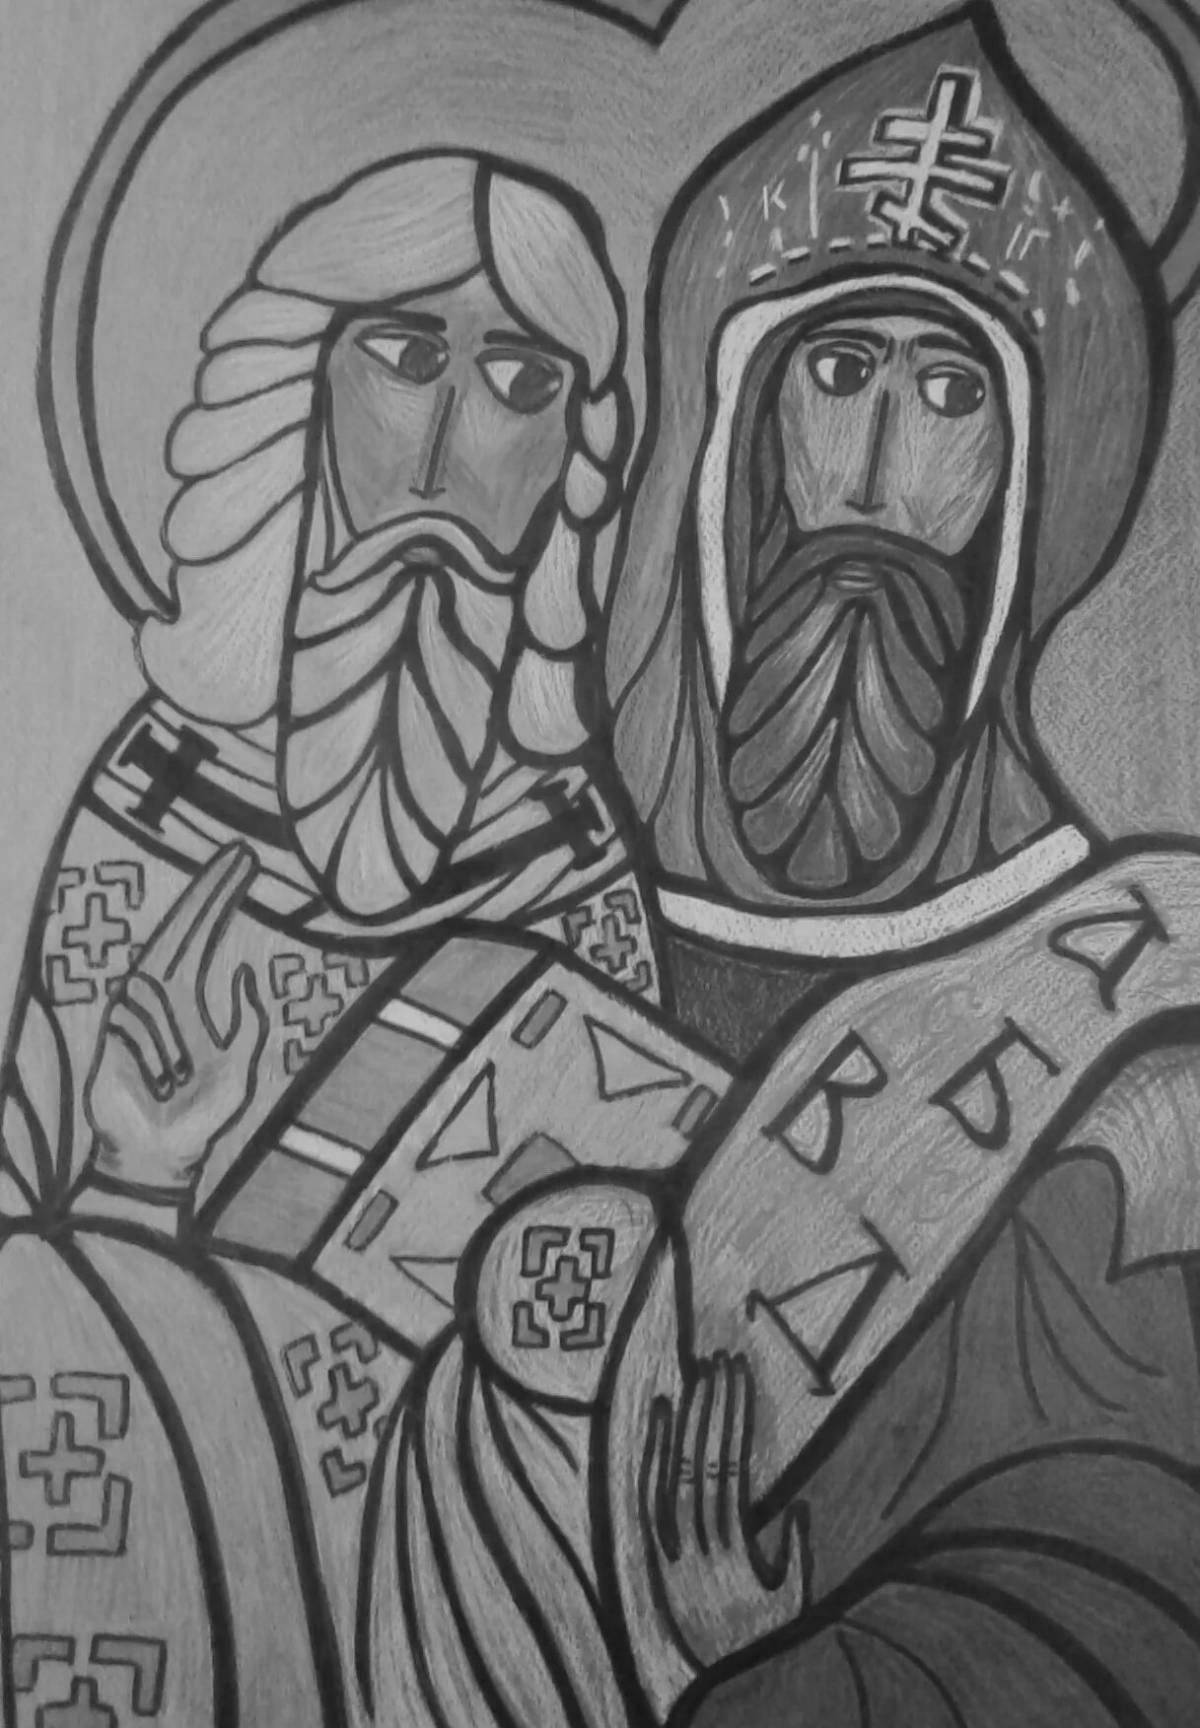 Cyril and Methodius coloring page